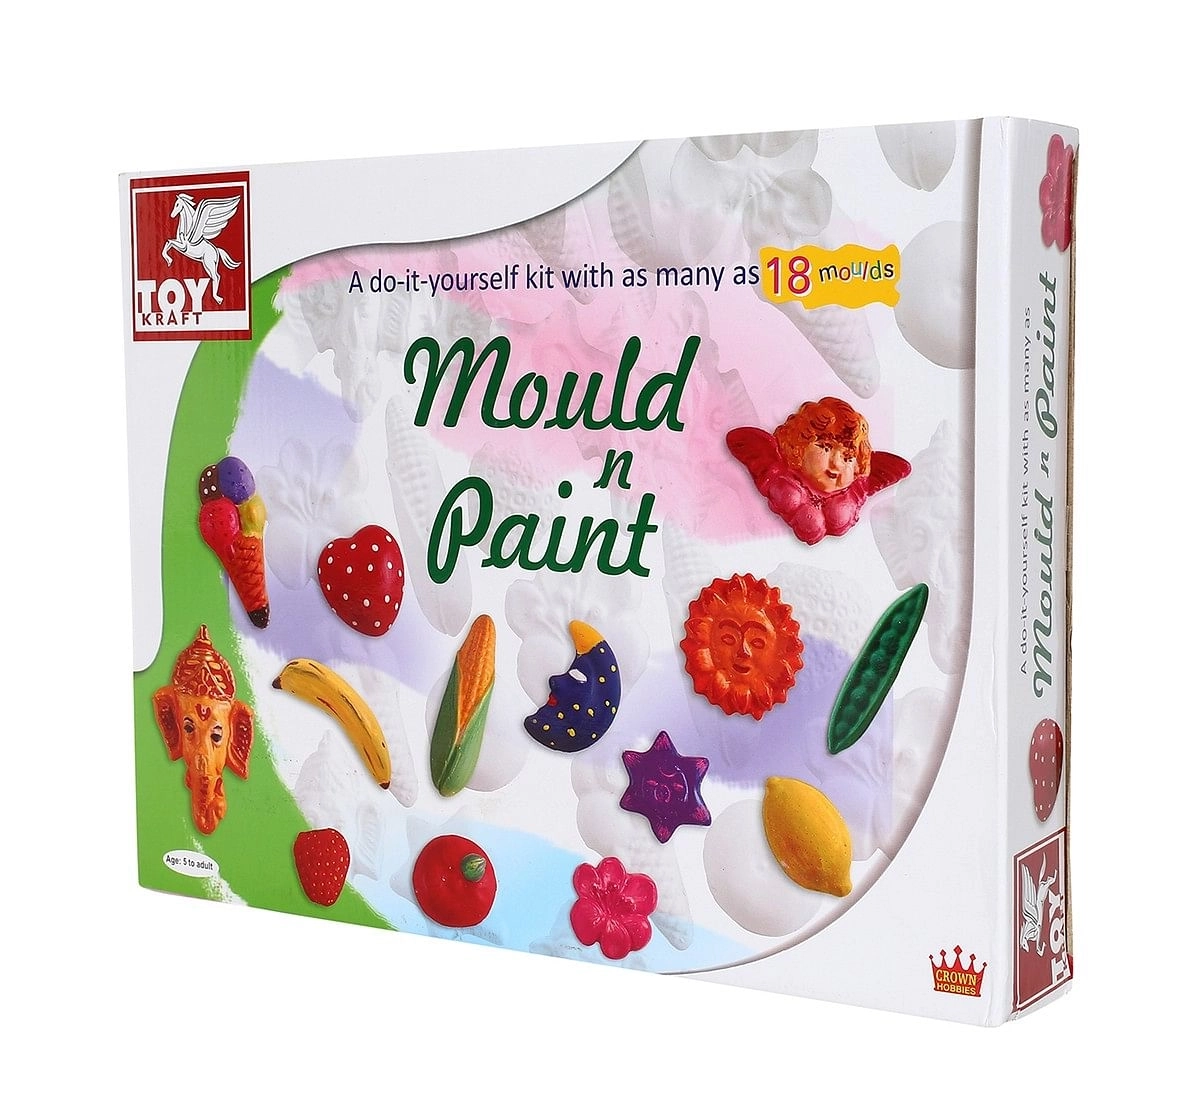 Toy Kraft Mould And Paint DIY Art & Craft Kits for Kids age 5Y+ 